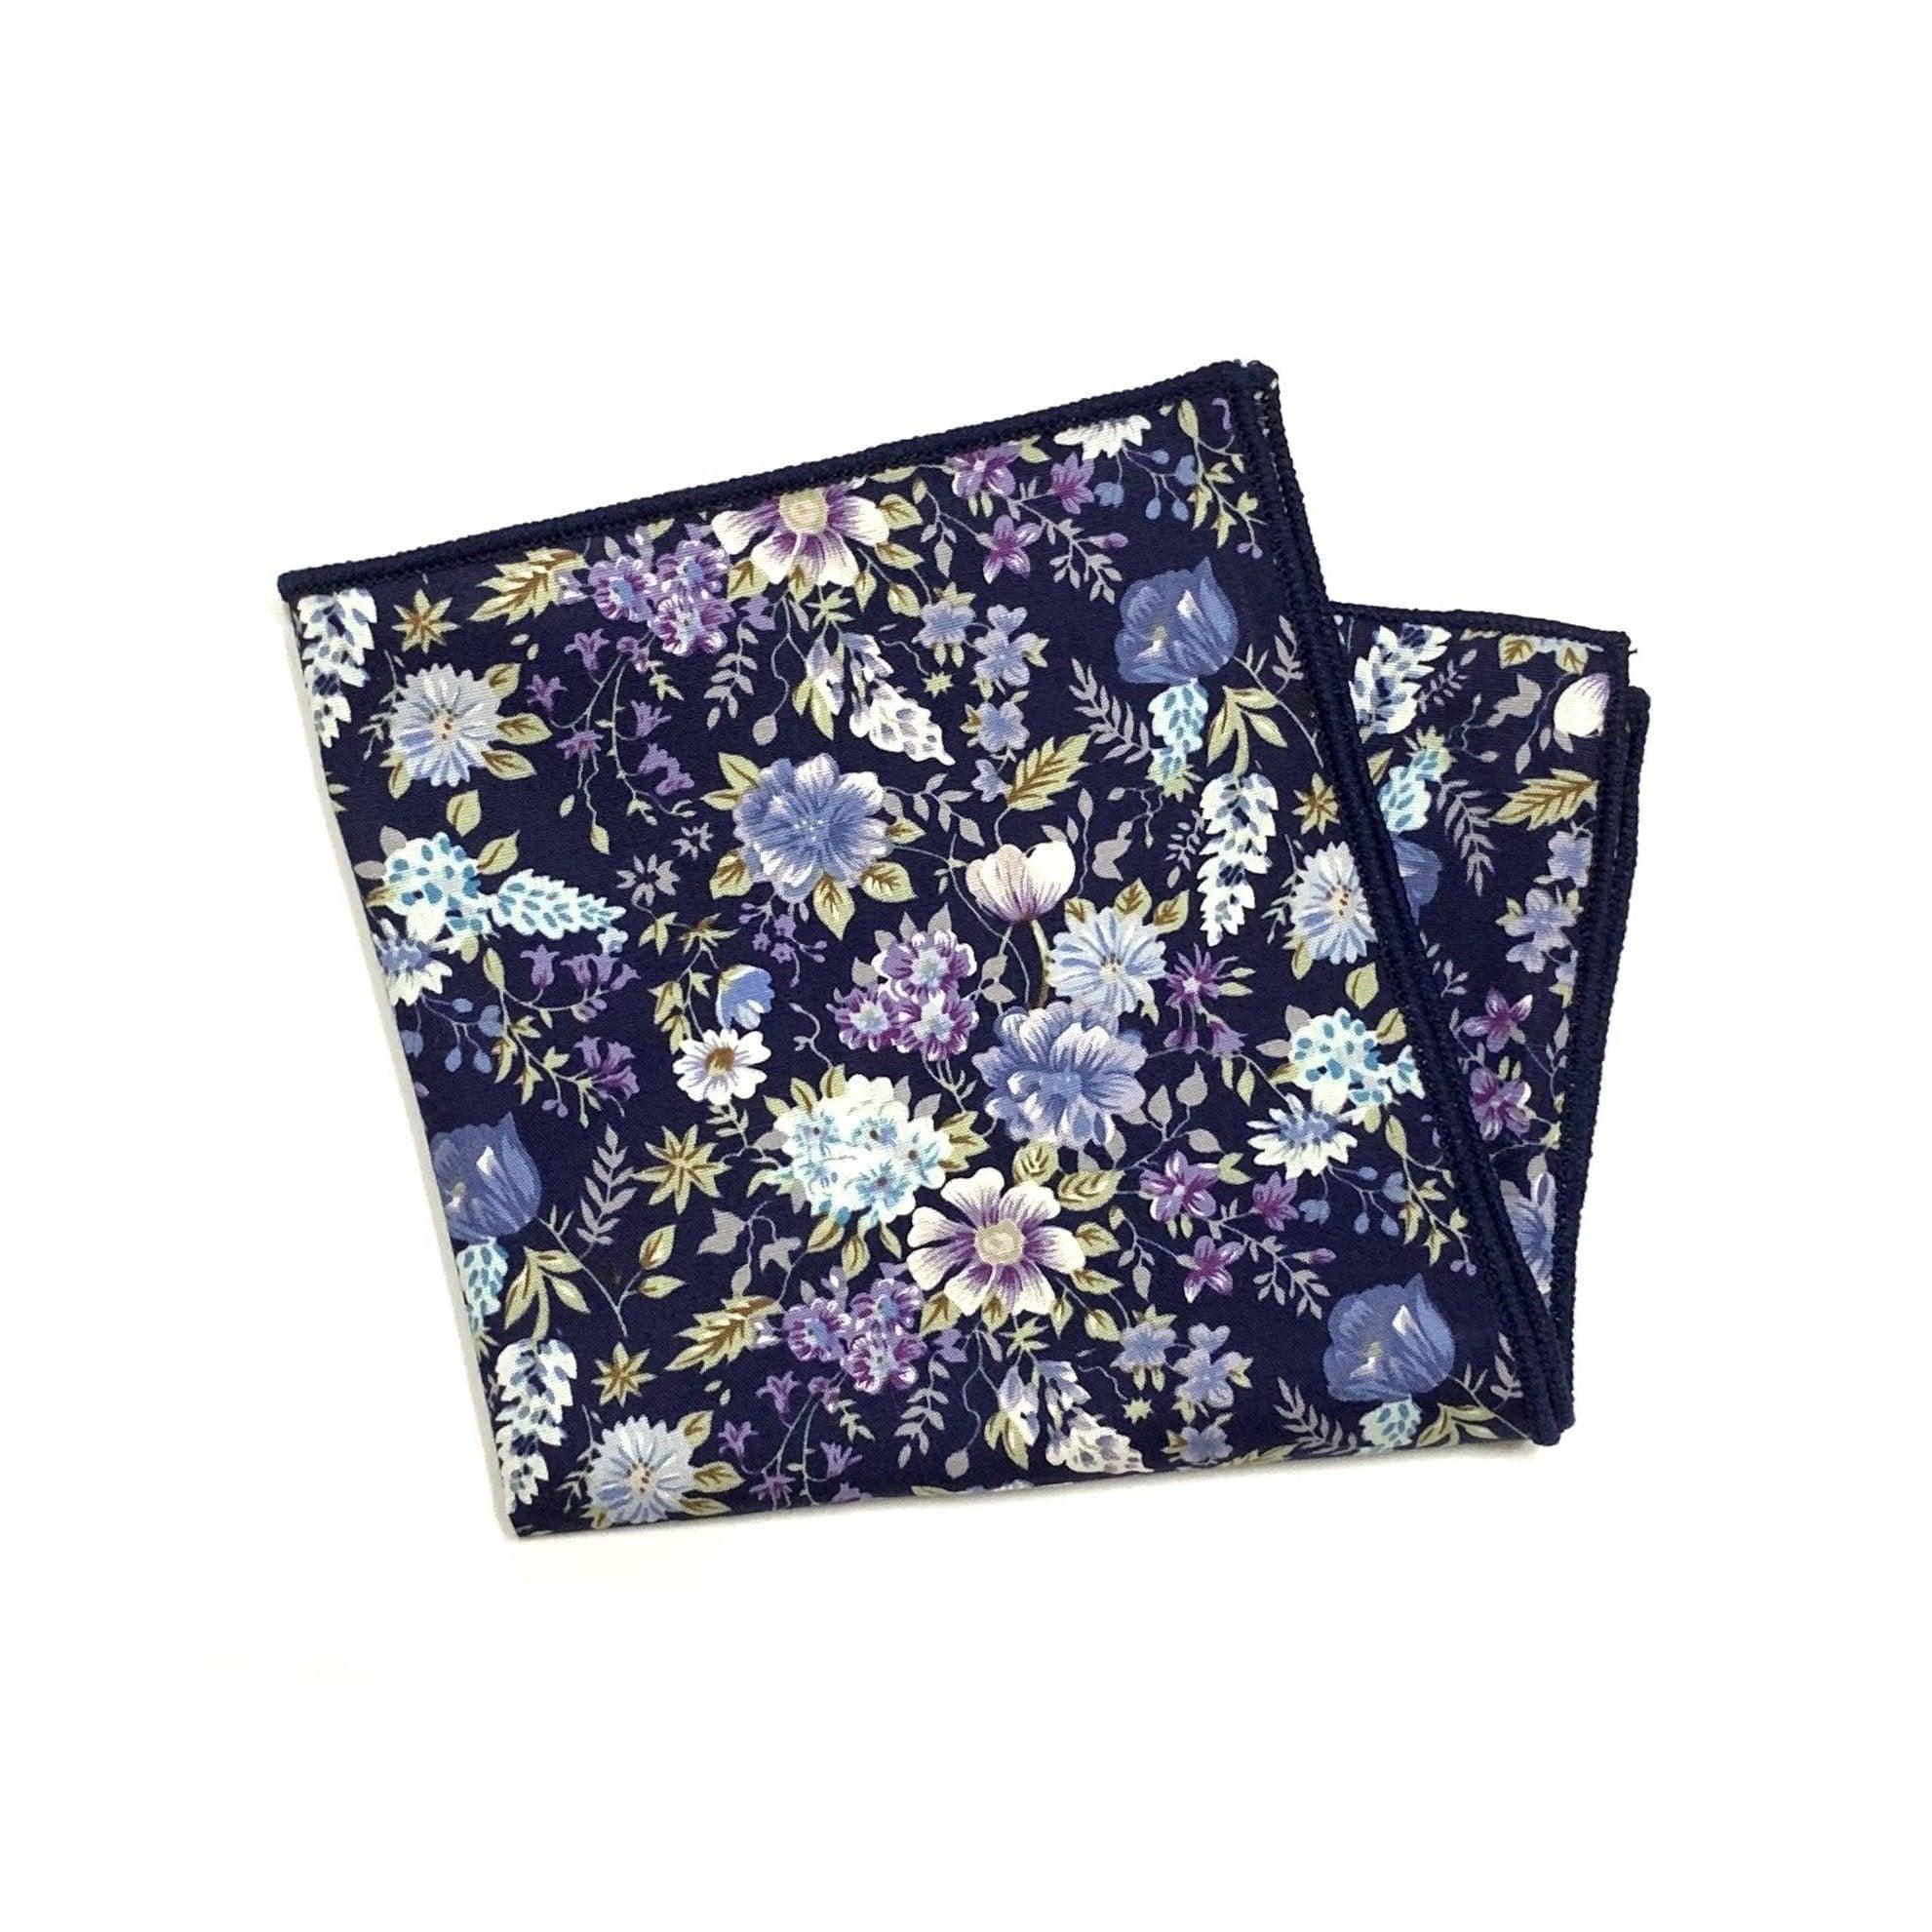 Purple Floral Pocket Square - Sweet Pea - Mytieshop Mytieshop Material CottonItem Length: 23 cm ( 9 inches)Item Width : 22 cm (8.6 inches) Base is Blue Great for: Groom Groomsmen Wedding Shoots Formal Prom Fancy Parties Gifts and presents A dashing addition to any formal outfit. A purple pocket square with a sweet floral design, this piece is perfect for adding a touch of personality to any suit or tuxedo. Class up your look with this dapper accessory. Whether you&#39;re wearing it to a wedding or j